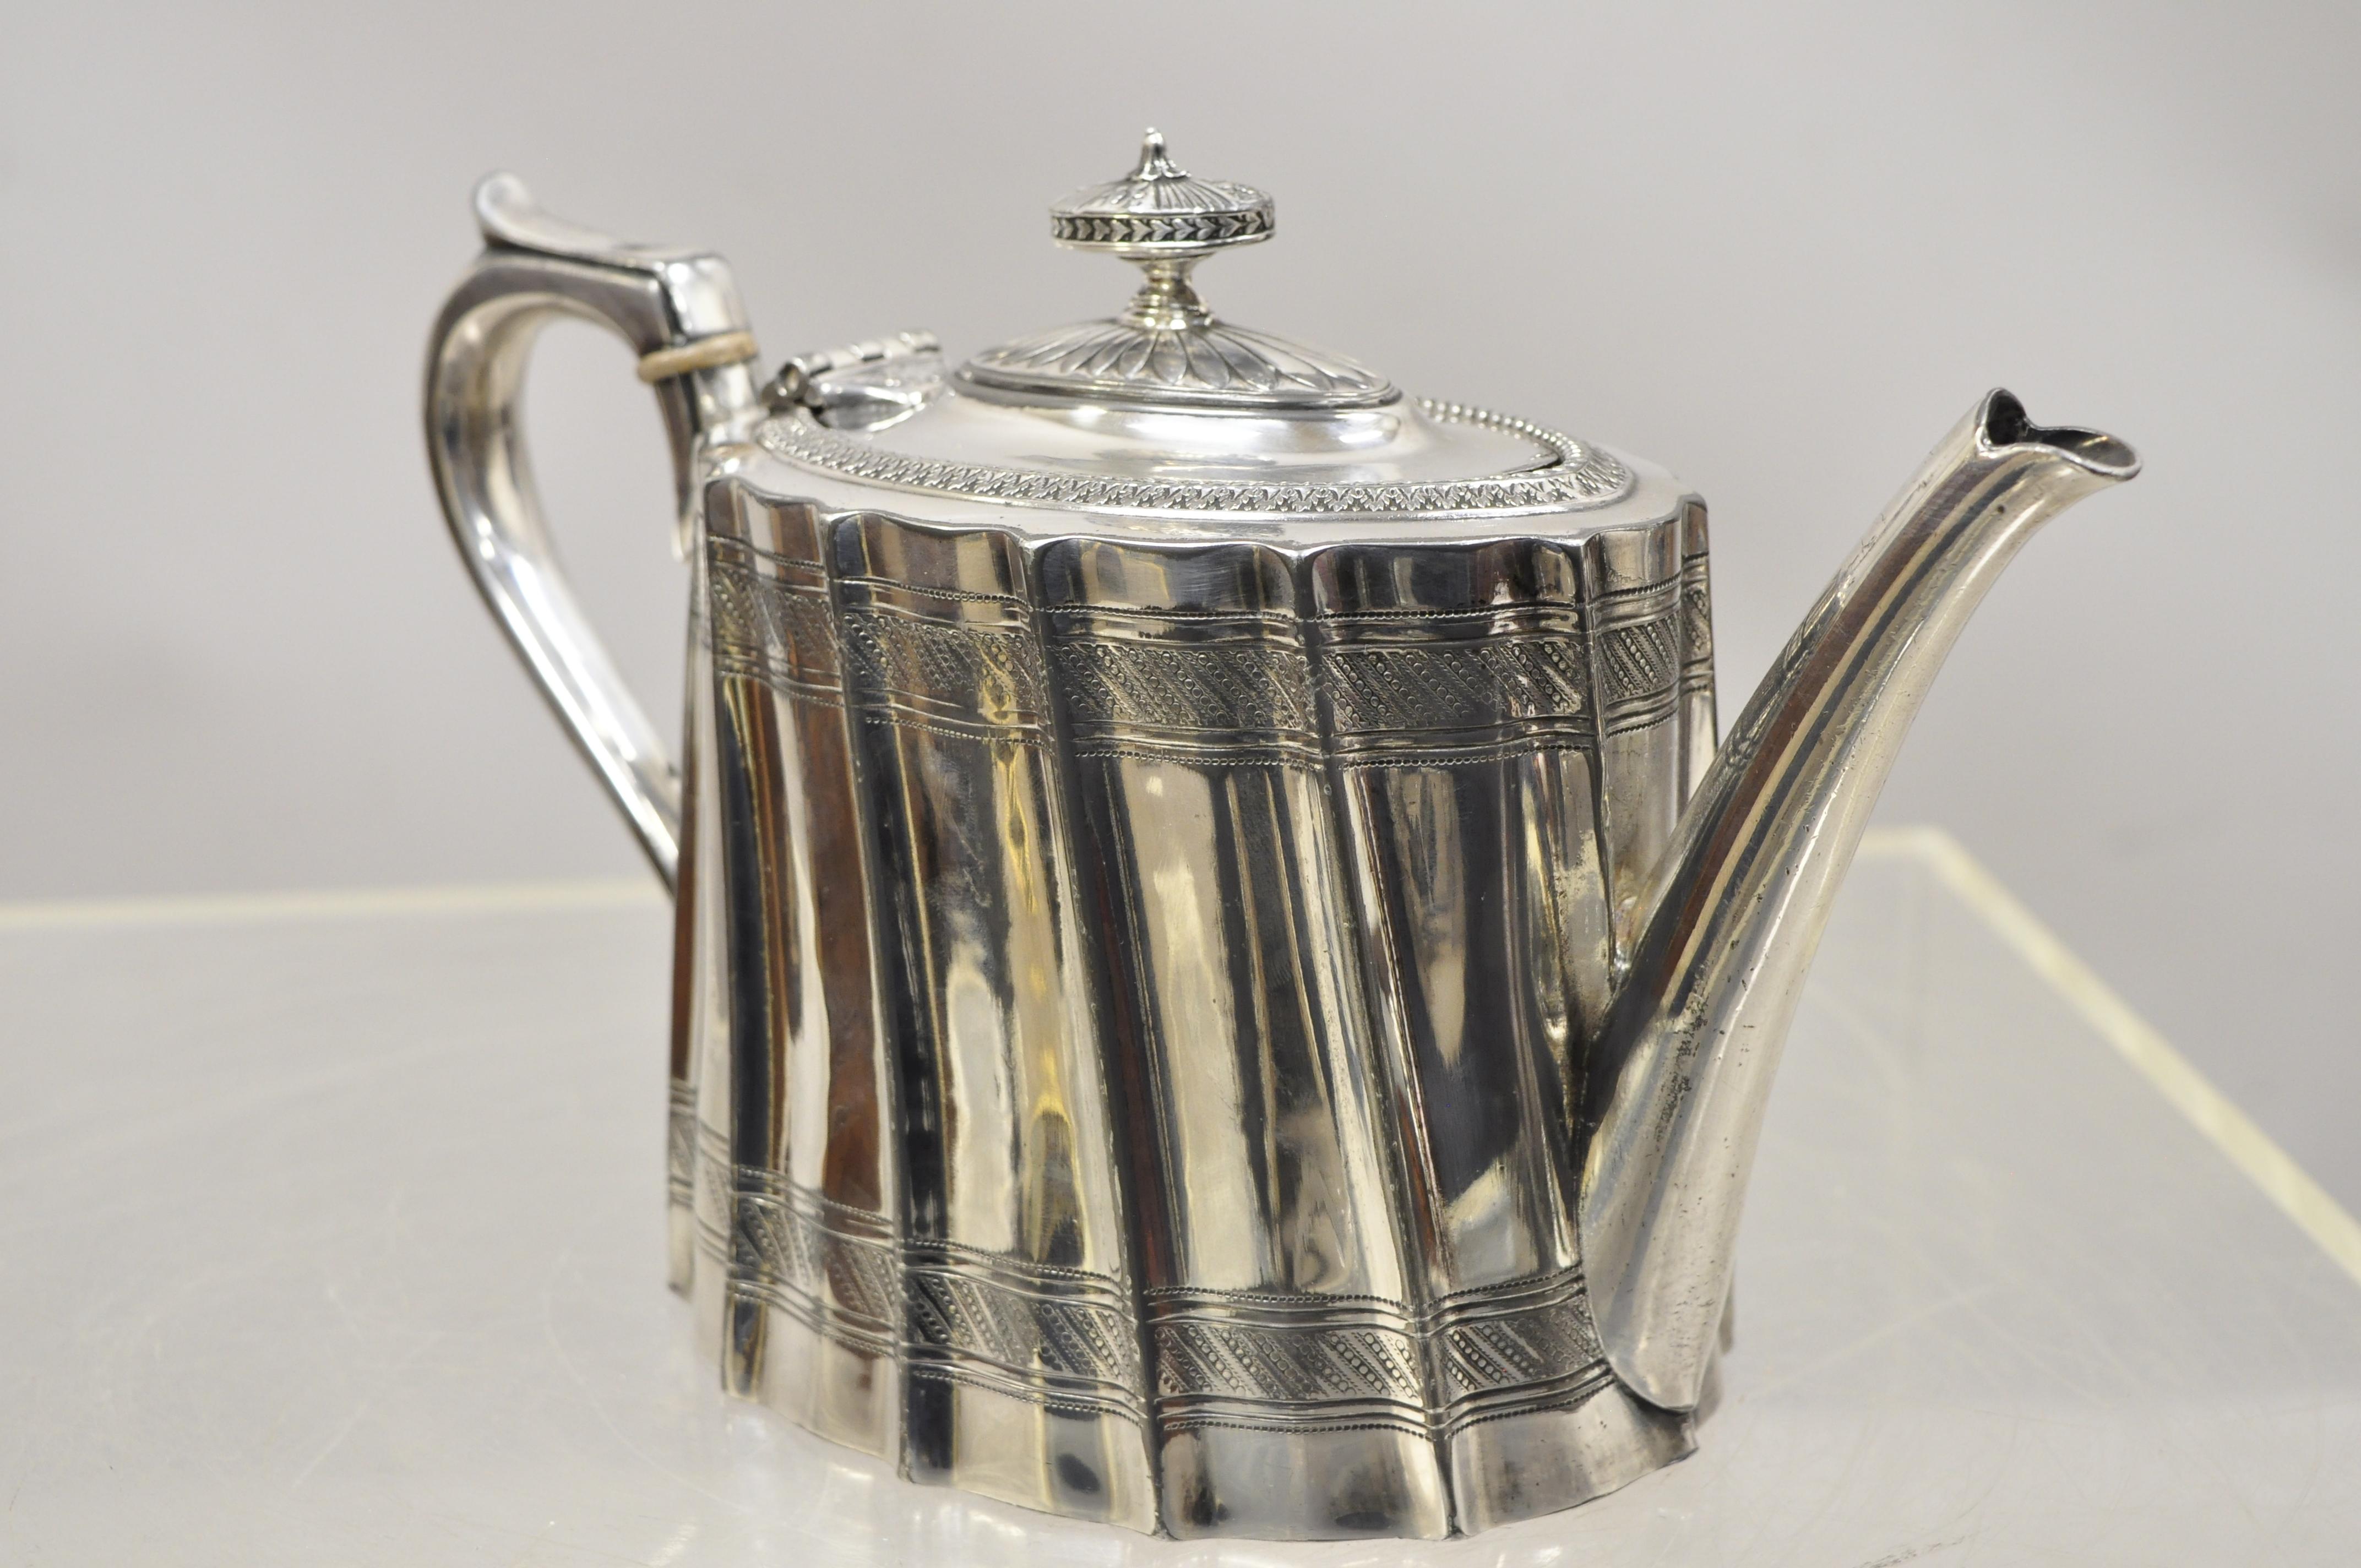 James Dixon & Sons English Edwardian Victorian silver plated coffee pot teapot (B). Item features urn form handle, chased form, marked to underside, very nice antique item, quality English craftsmanship, circa late 19th century. Measurements: 6